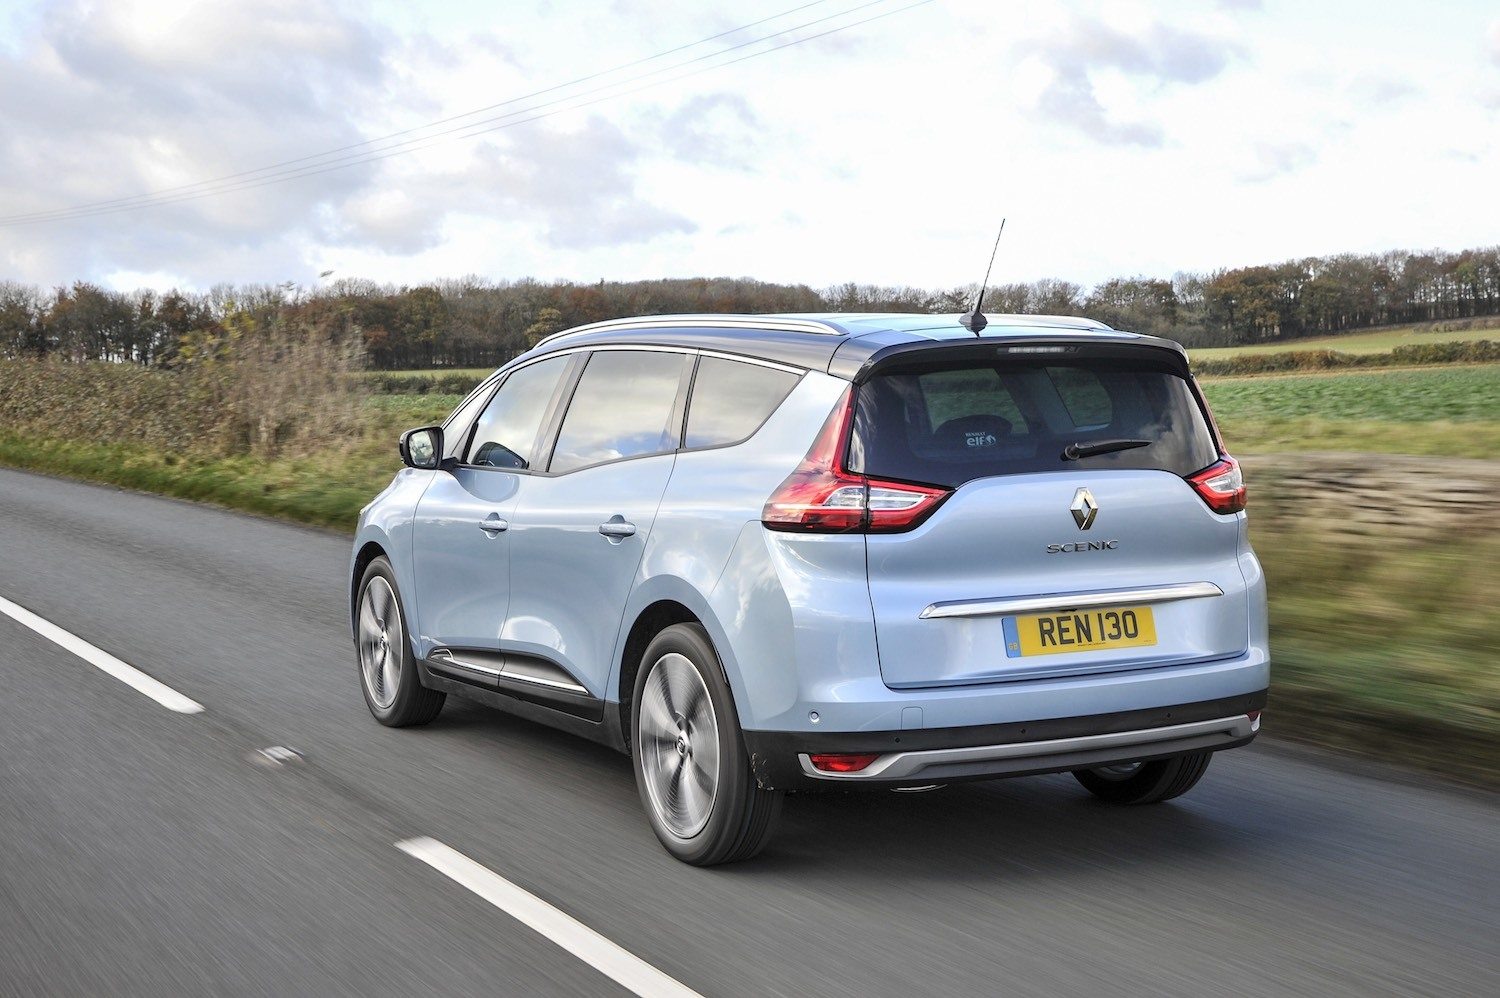 Neil Lyndon reviews the lates Renault Scenic for Drive 6